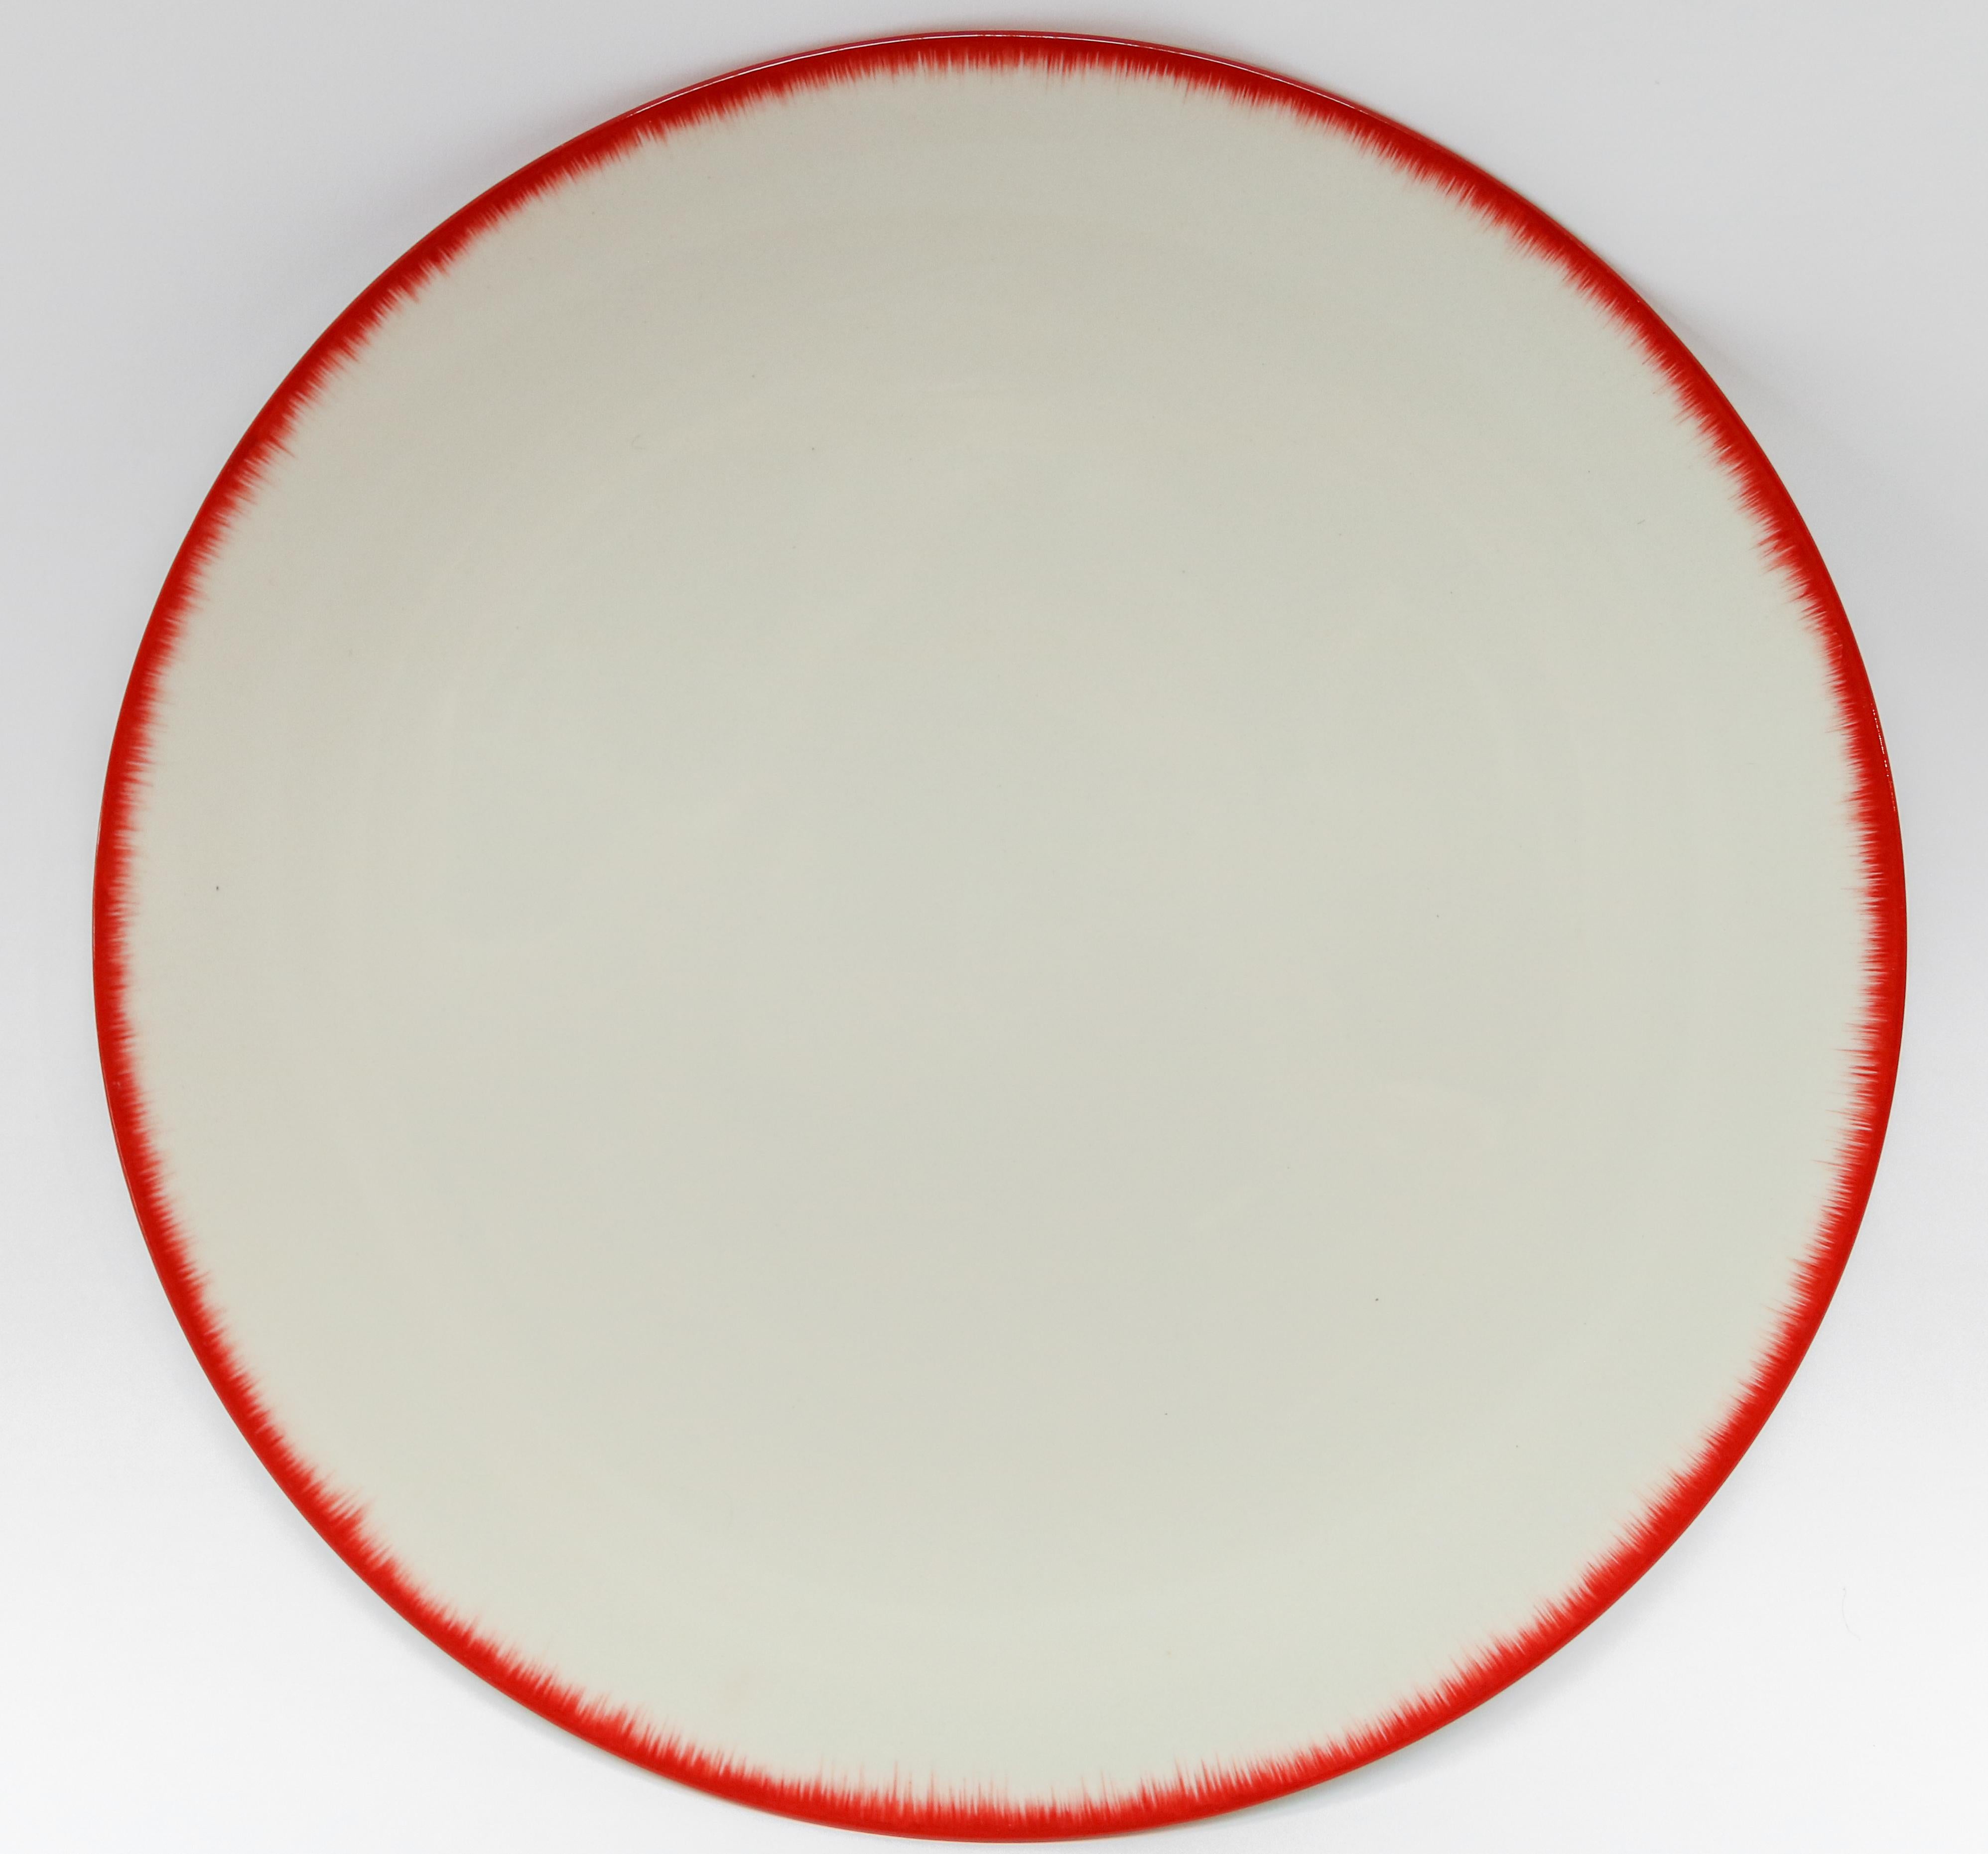 Ann Demeulemeester for Serax Dé Dinner Plate / Charger in off White / Red Rim In New Condition For Sale In Los Angeles, CA